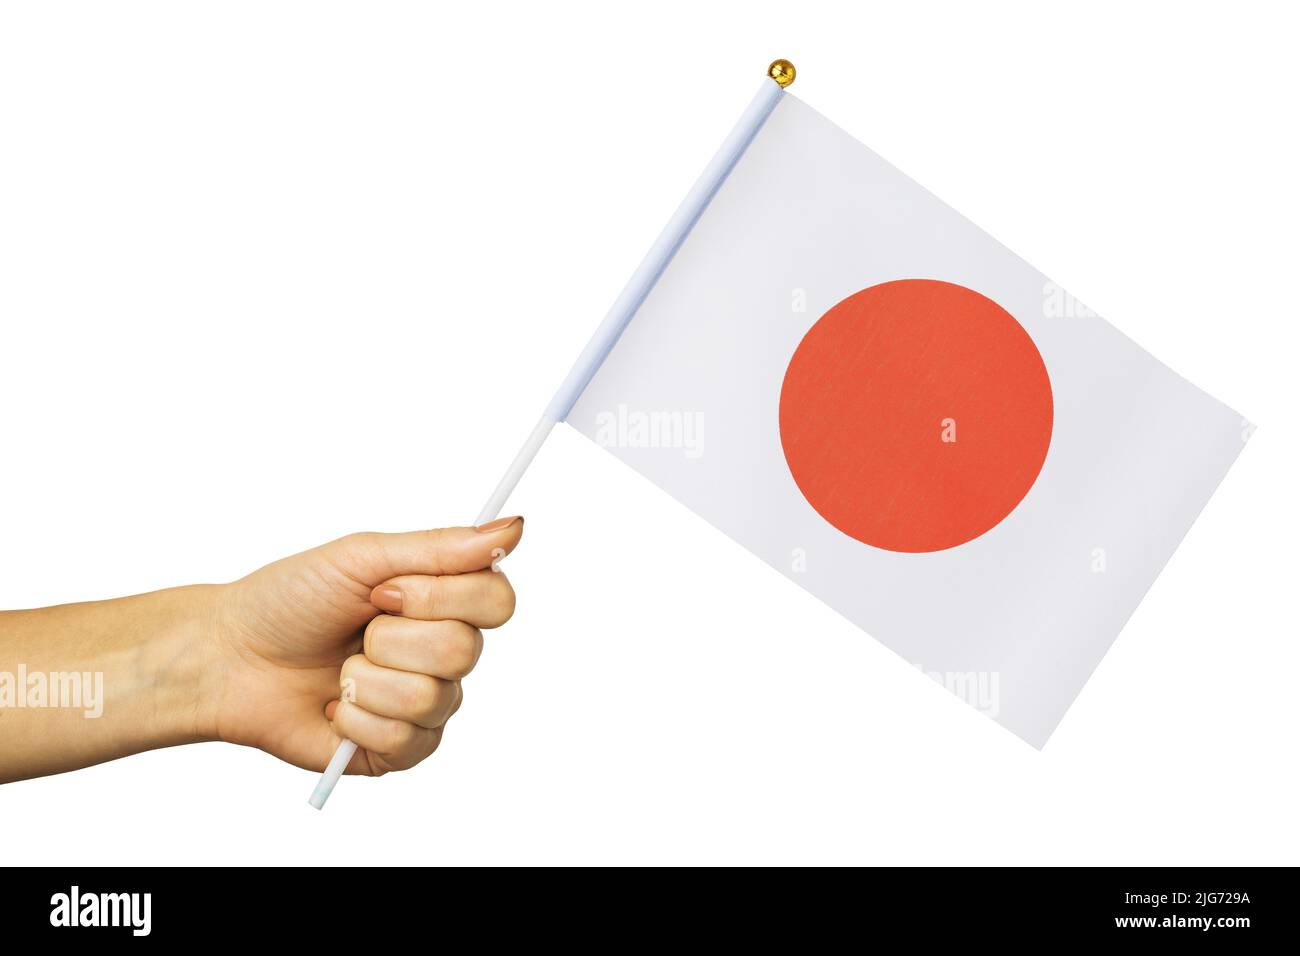 Female hand holding Japan flag isolated on white background, template for designers Stock Photo